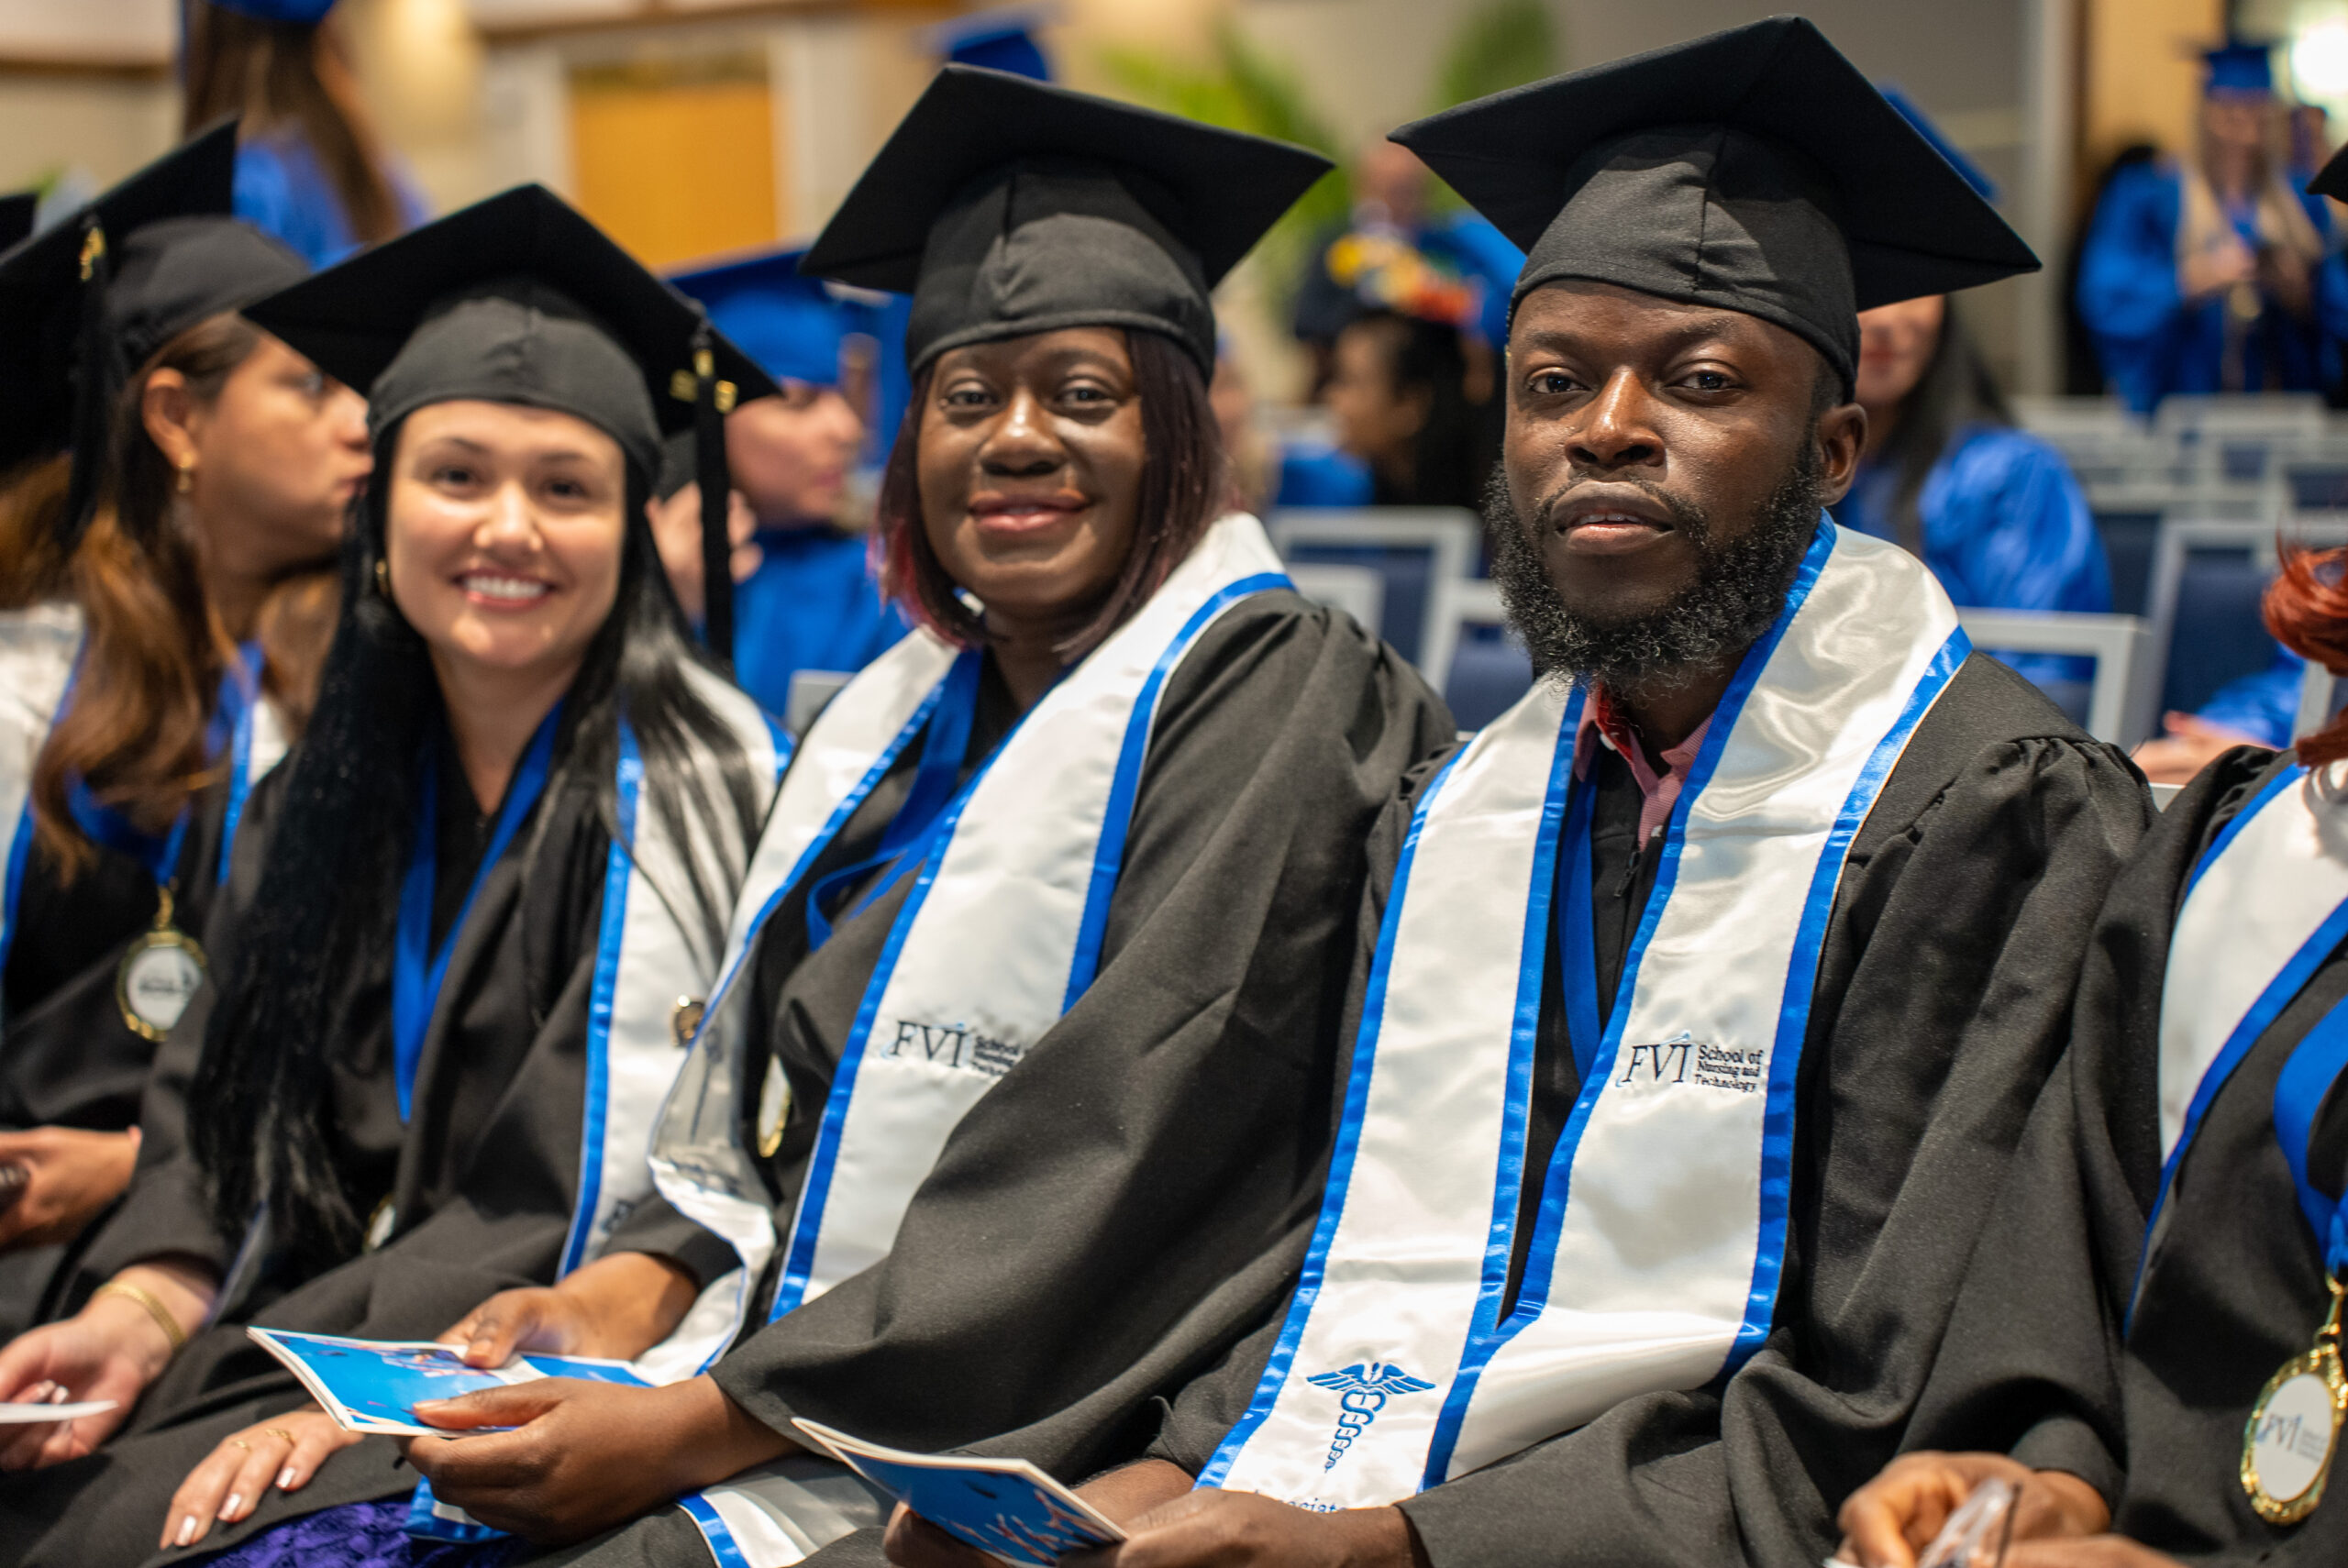 A group of Nursing graduates sitting at an FVI graduation ceremony in their robes with their FVI stoles